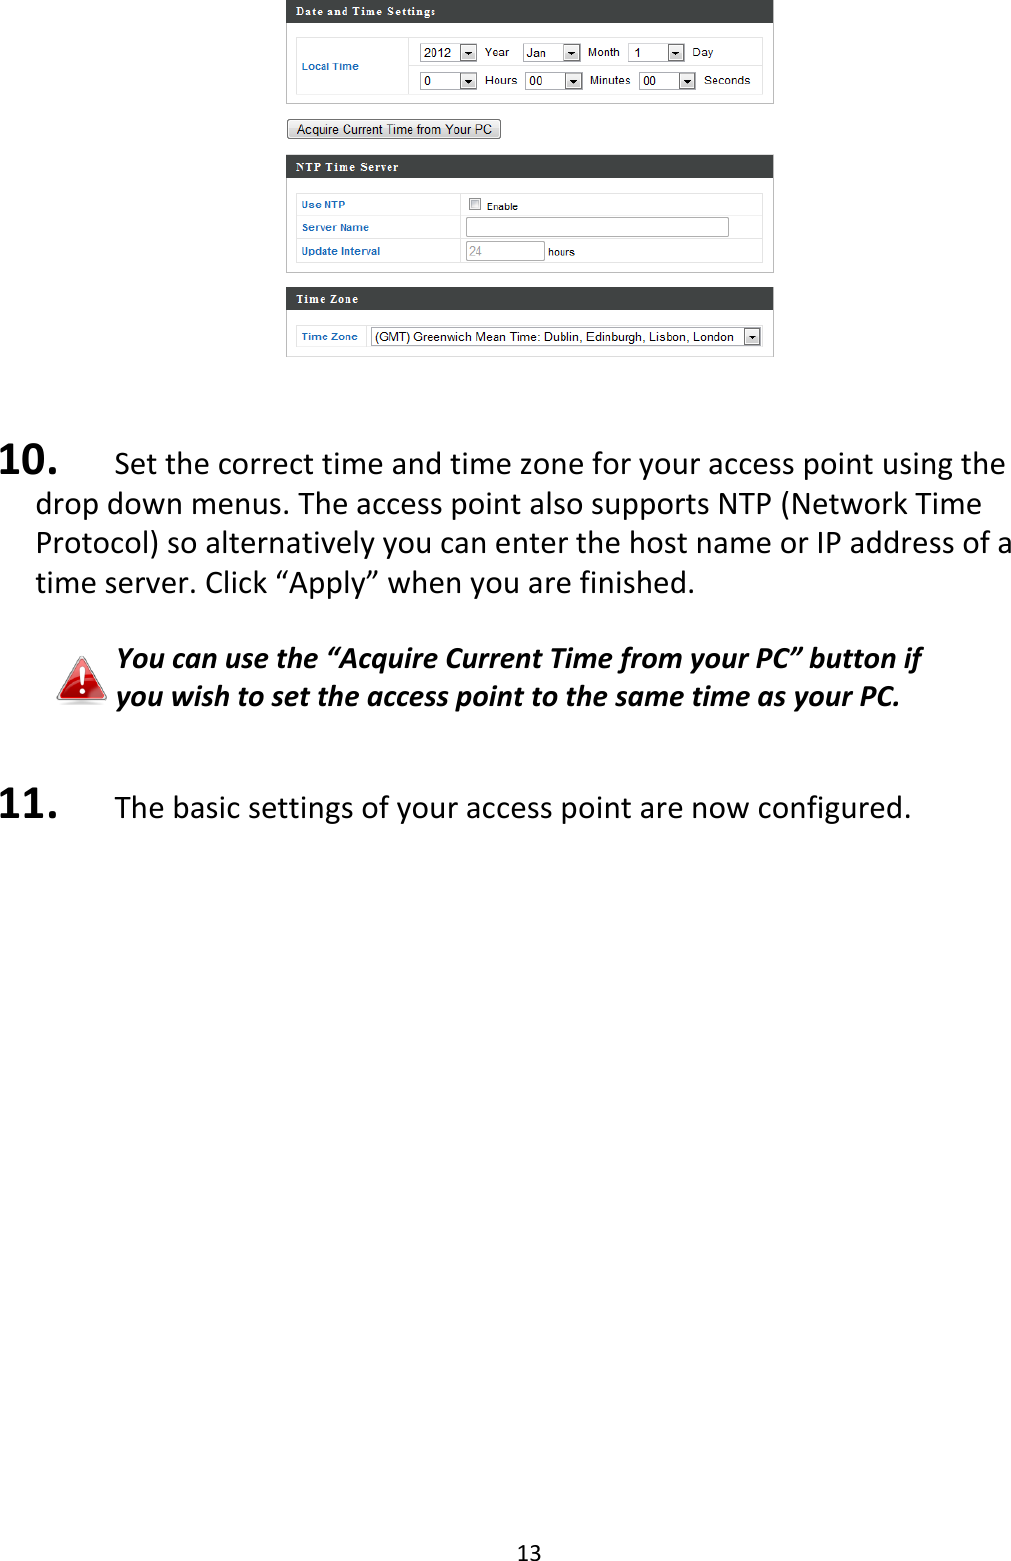 13    10.   Set the correct time and time zone for your access point using the drop down menus. The access point also supports NTP (Network Time Protocol) so alternatively you can enter the host name or IP address of a time server. Click “Apply” when you are finished.  You can use the “Acquire Current Time from your PC” button if you wish to set the access point to the same time as your PC.   11.   The basic settings of your access point are now configured.                     